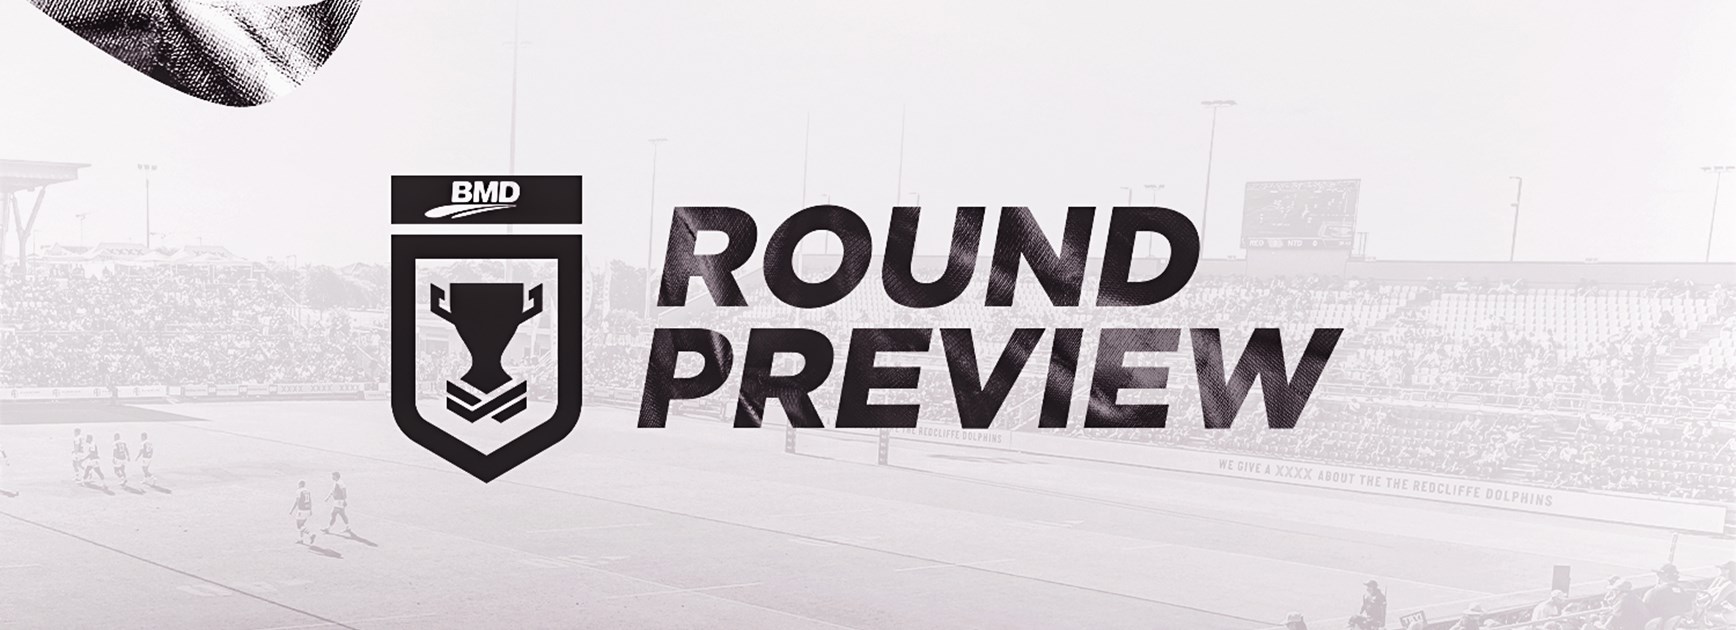 BMD Premiership Round 2 preview